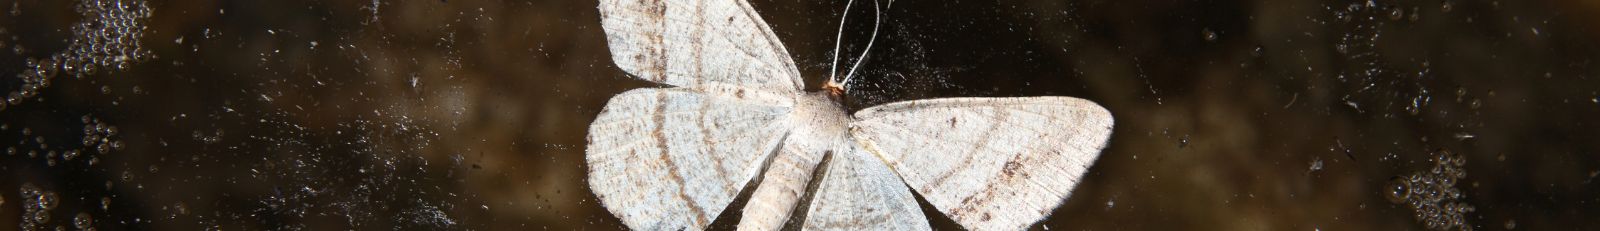 Image of moth on water.